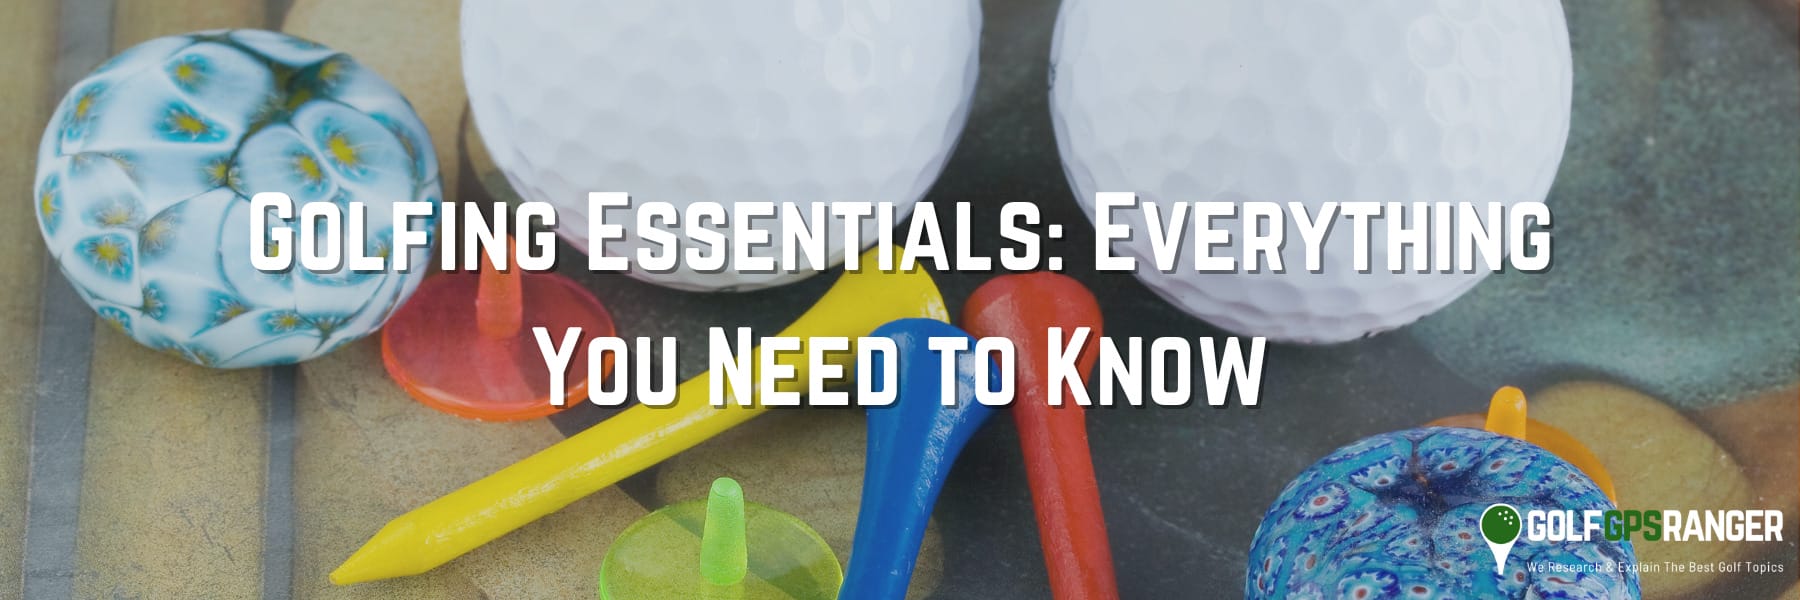 Golfing Essentials Everything You Need to Know